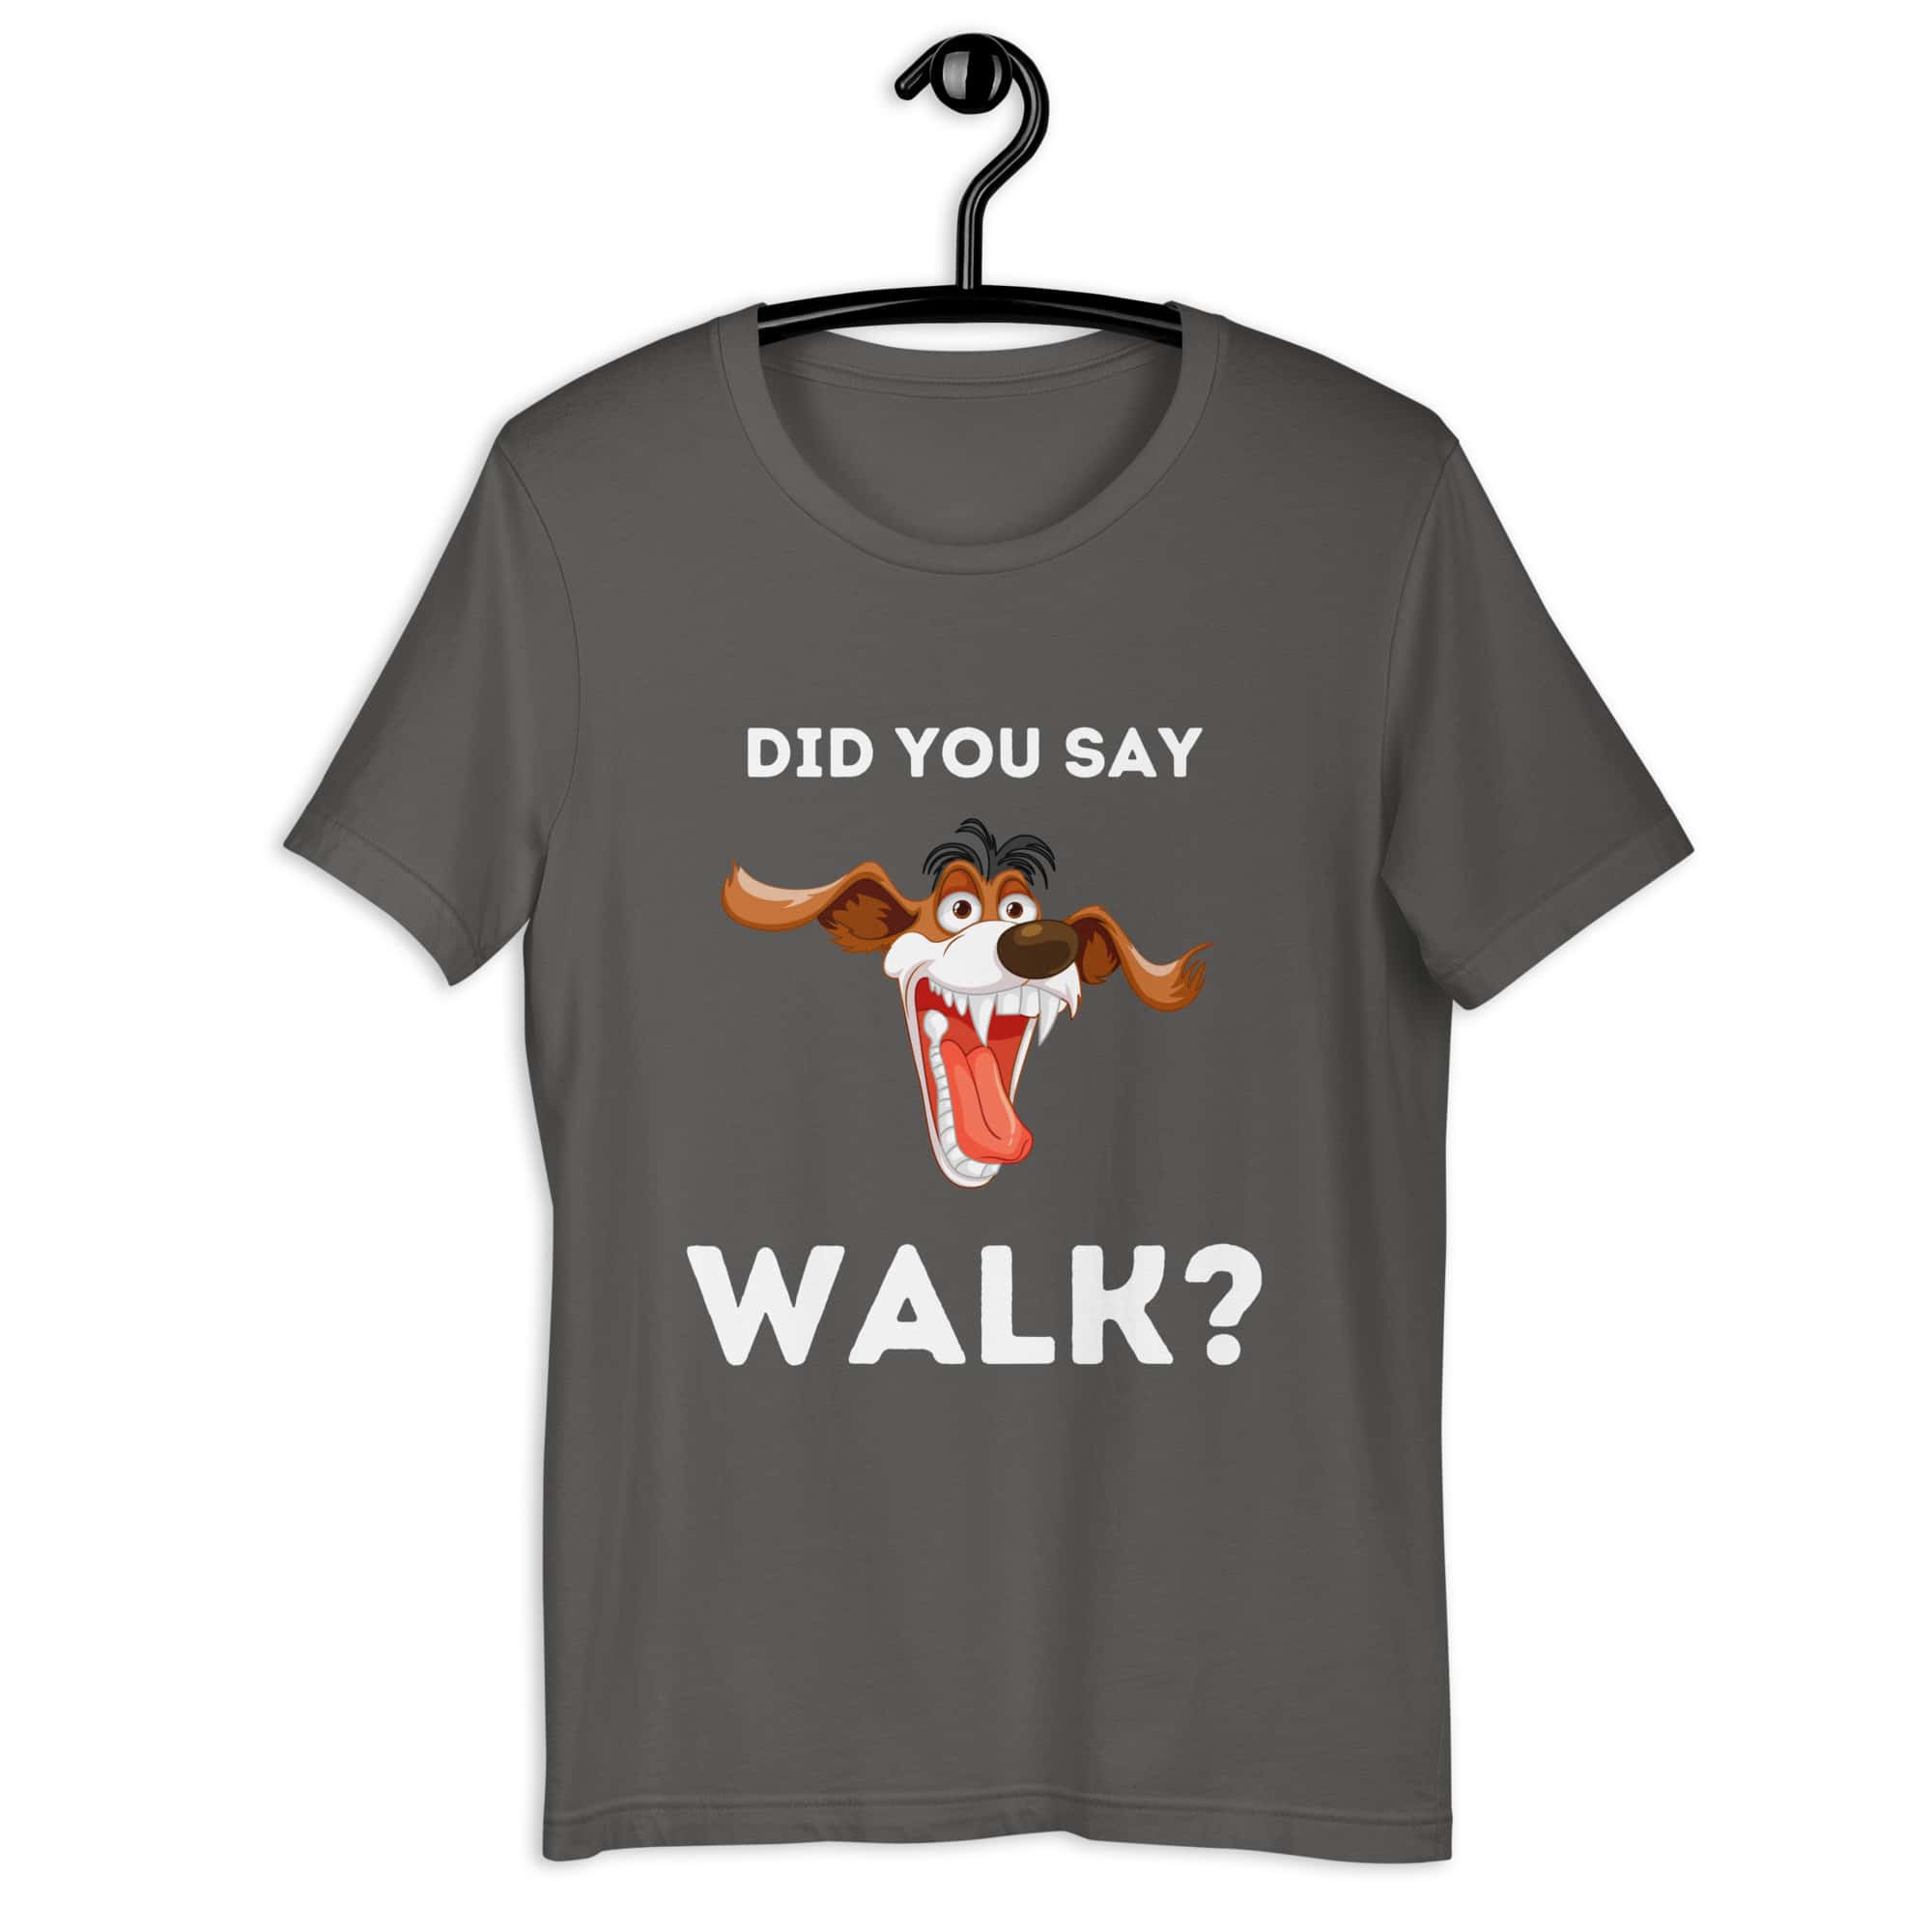 The "Funny 'Did You Say Walk?' Dog Unisex T-Shirt" captures the excitement dogs feel at the mention of a walk. Made from a comfortable, durable blend, it features a vibrant graphic that dog lovers will relate to. Available in various sizes and colors, it's perfect for casual wear, highlighting a universal moment in dog ownership with humor and style. Royal Asphalt